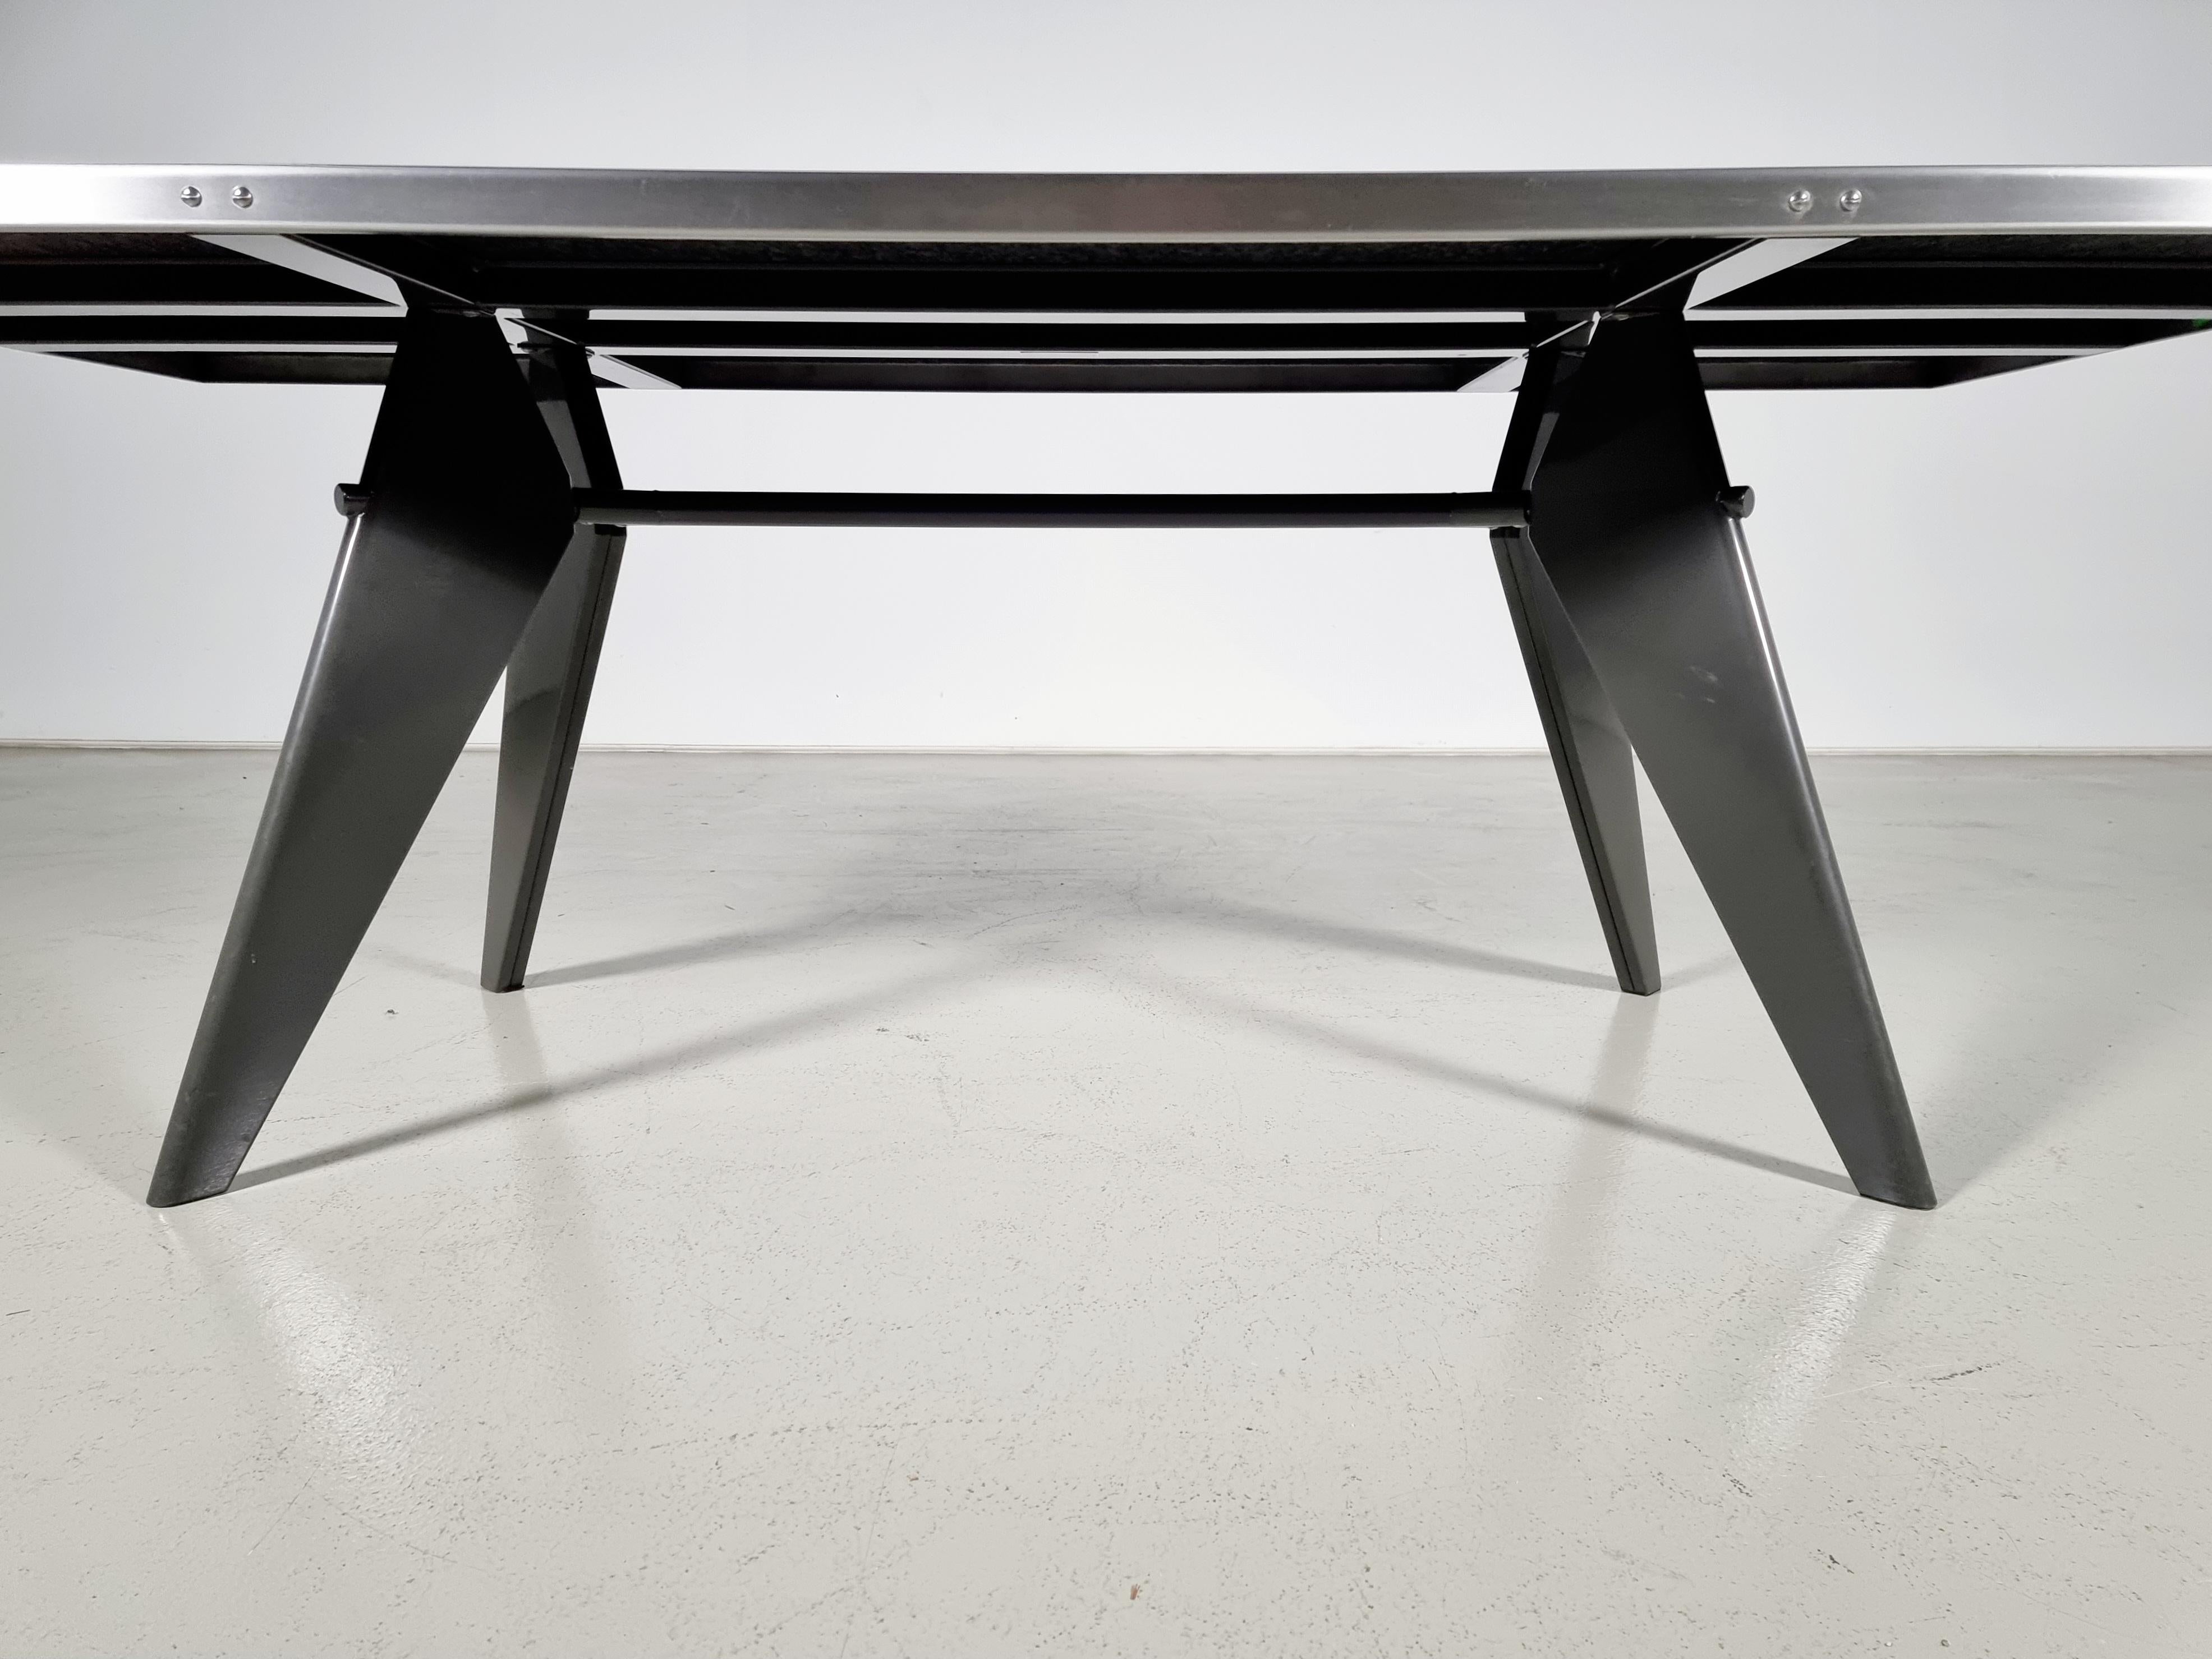 Jean Prouve by G-Star Raw for Vitra S.A.M. Tropique Table with matching chairs 3